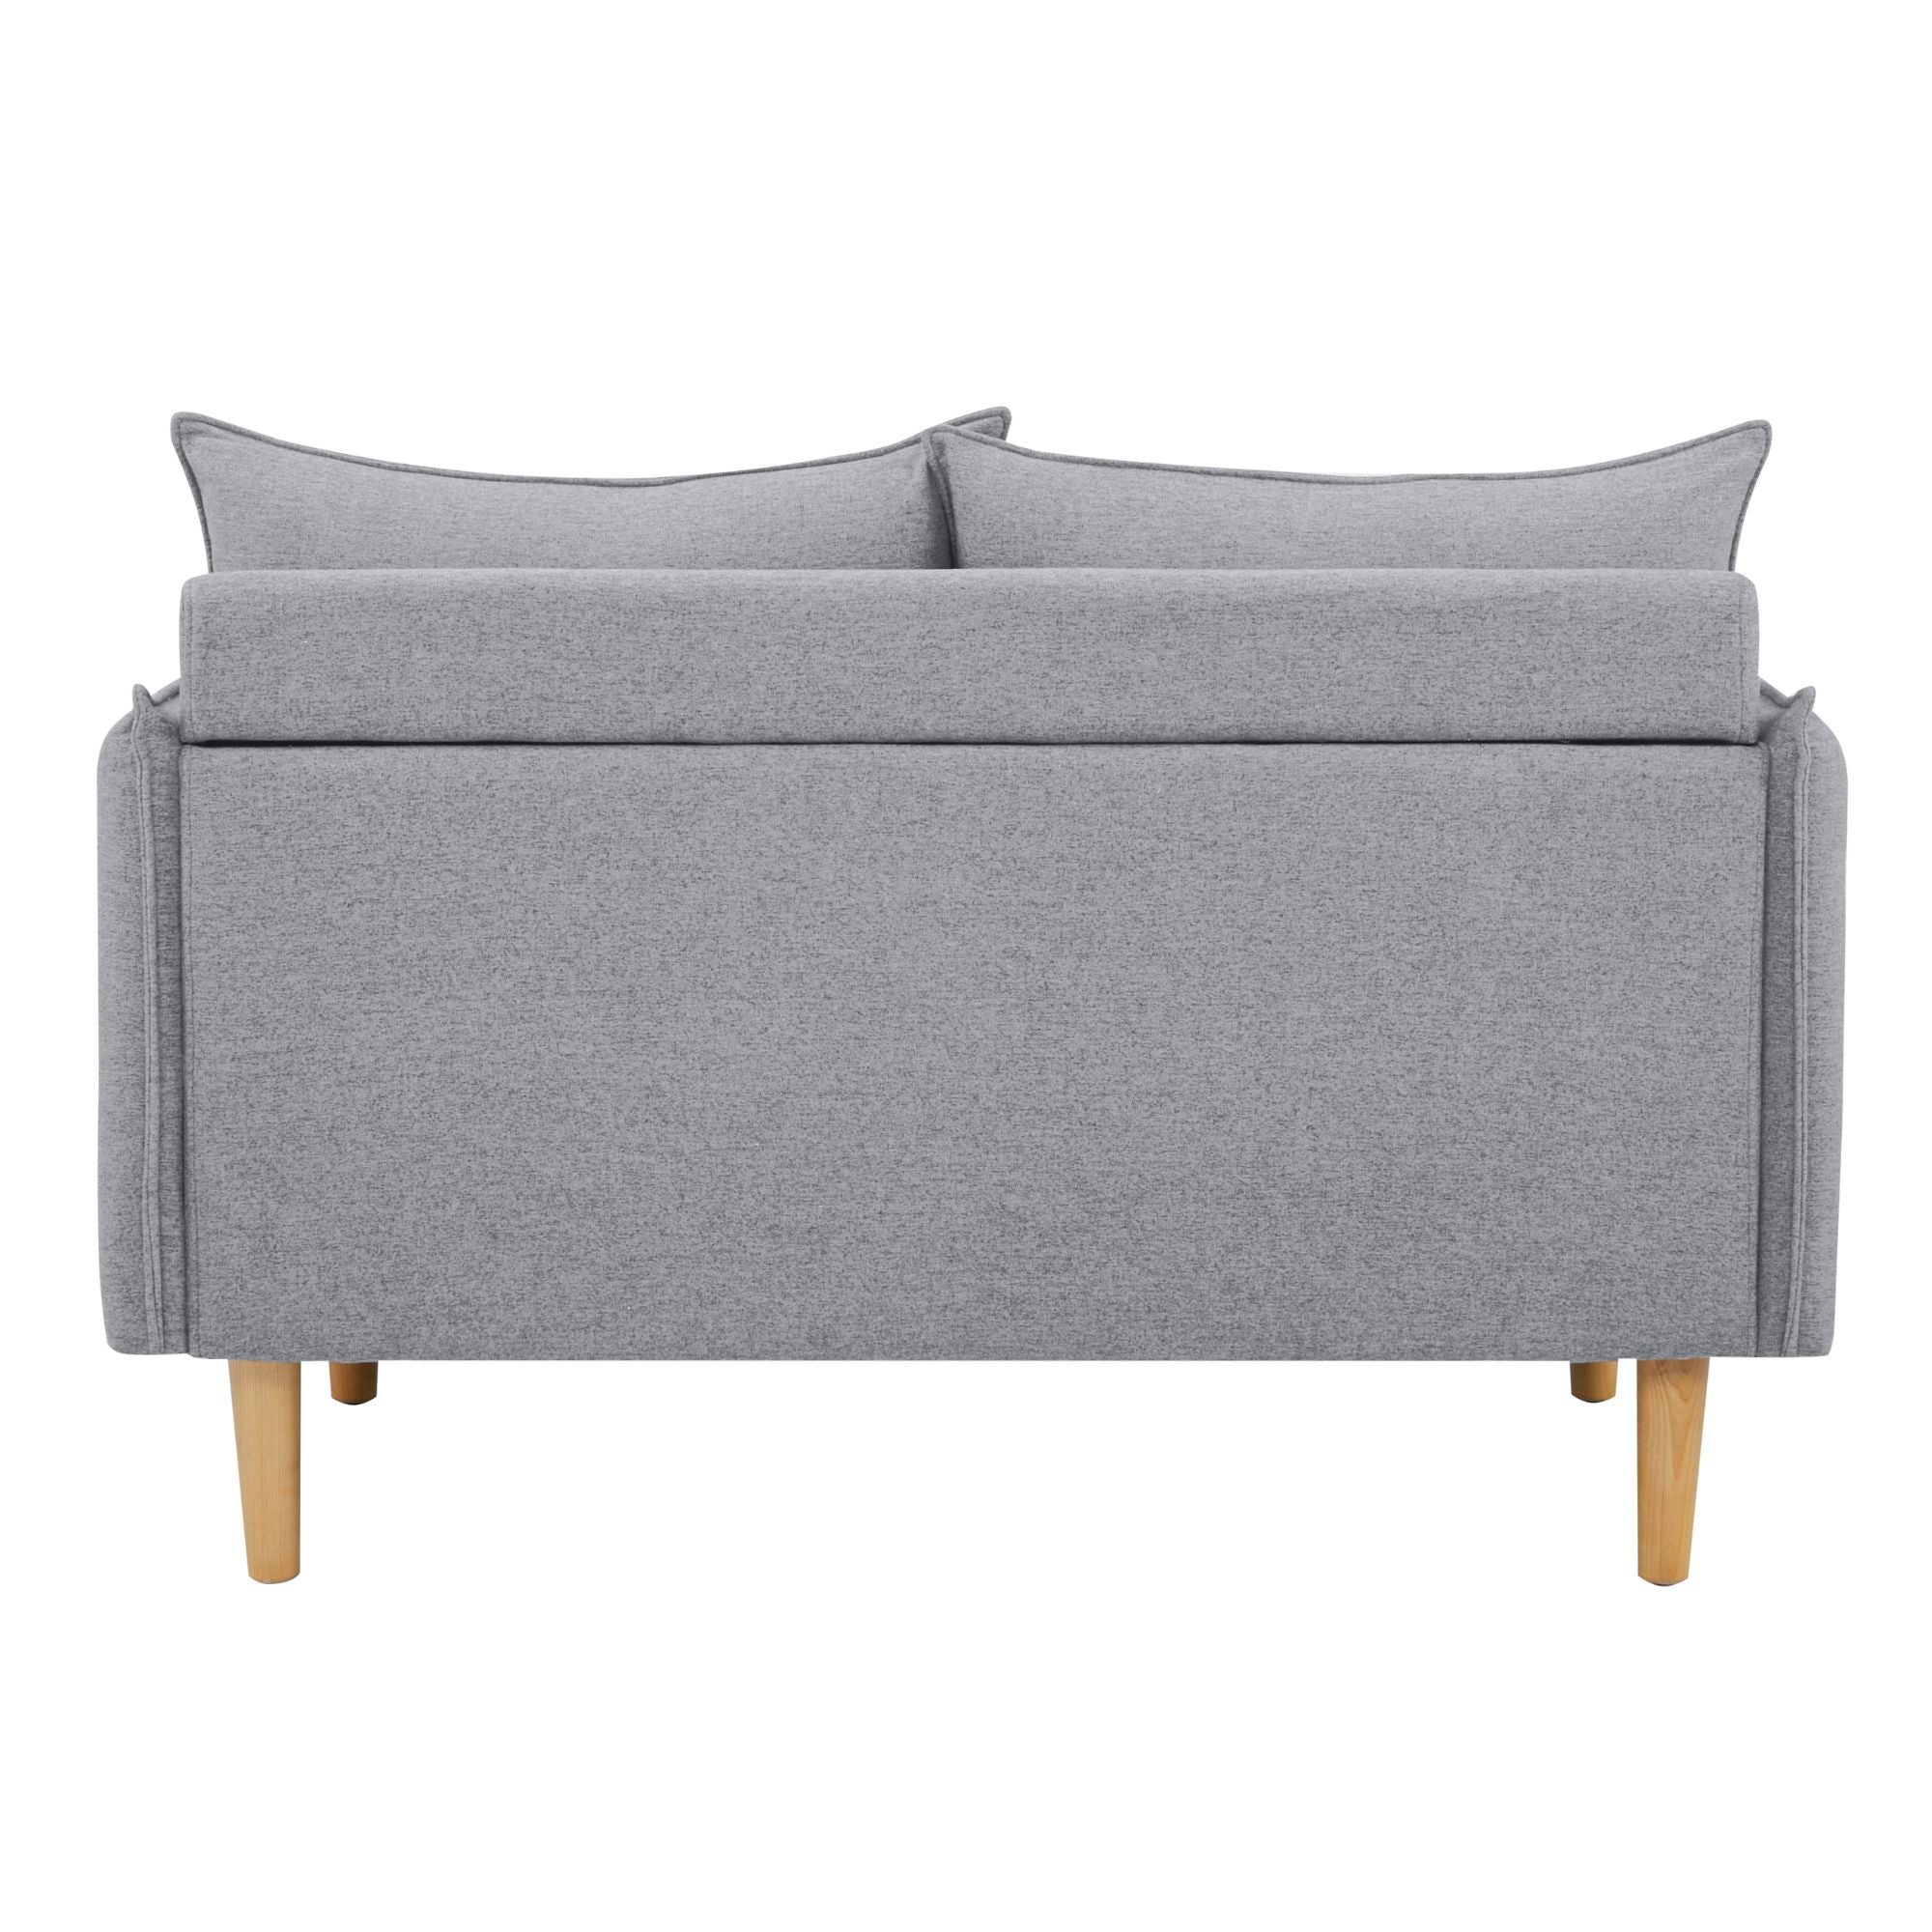 Sinatra 2 Seater Fabric Sofa Lounge Couch Grey